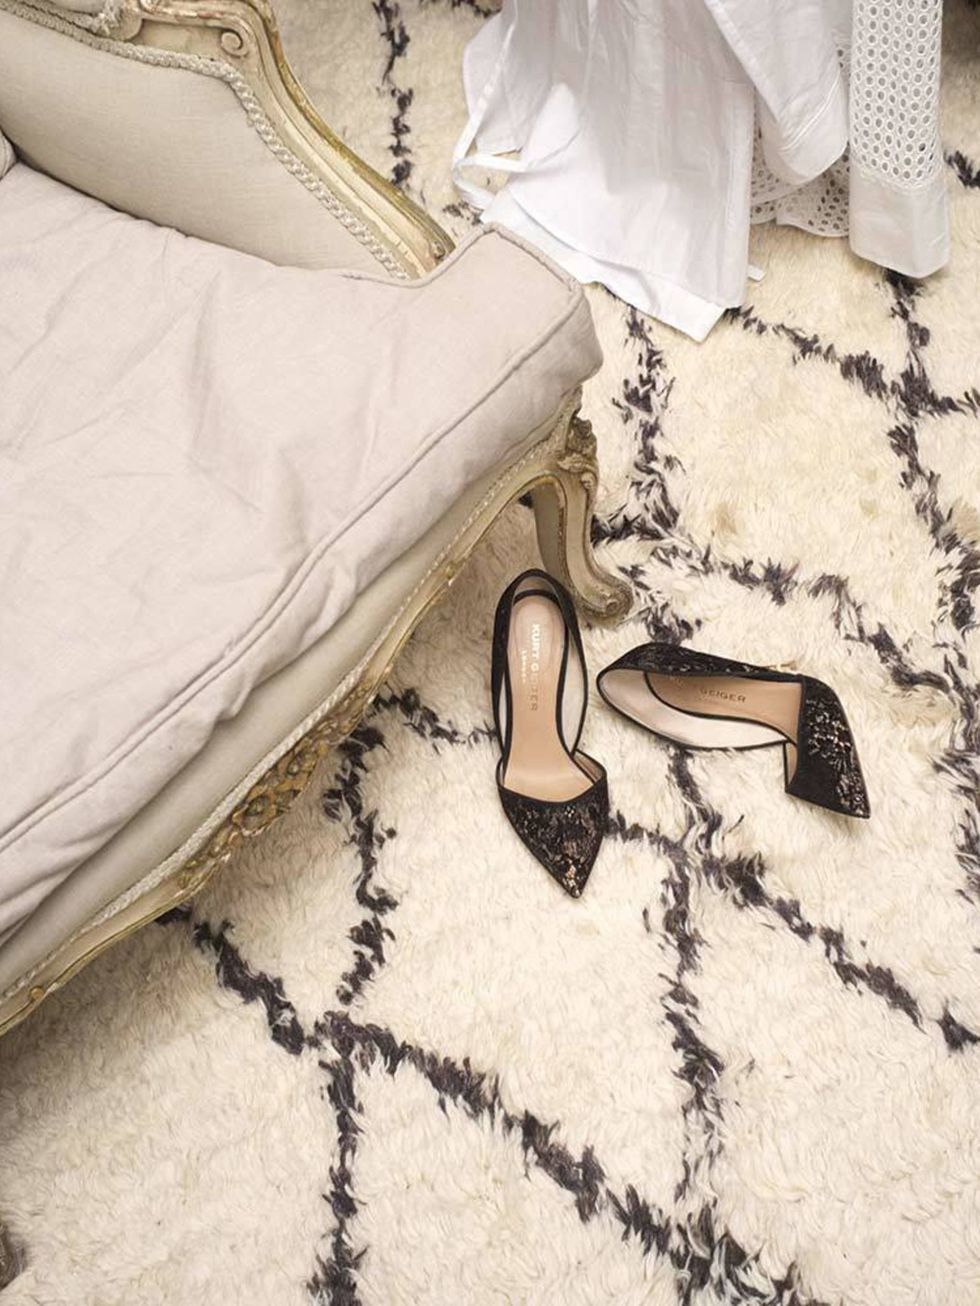 Kurt Geiger Stilettos: 'They're black lace with a gold heel.'